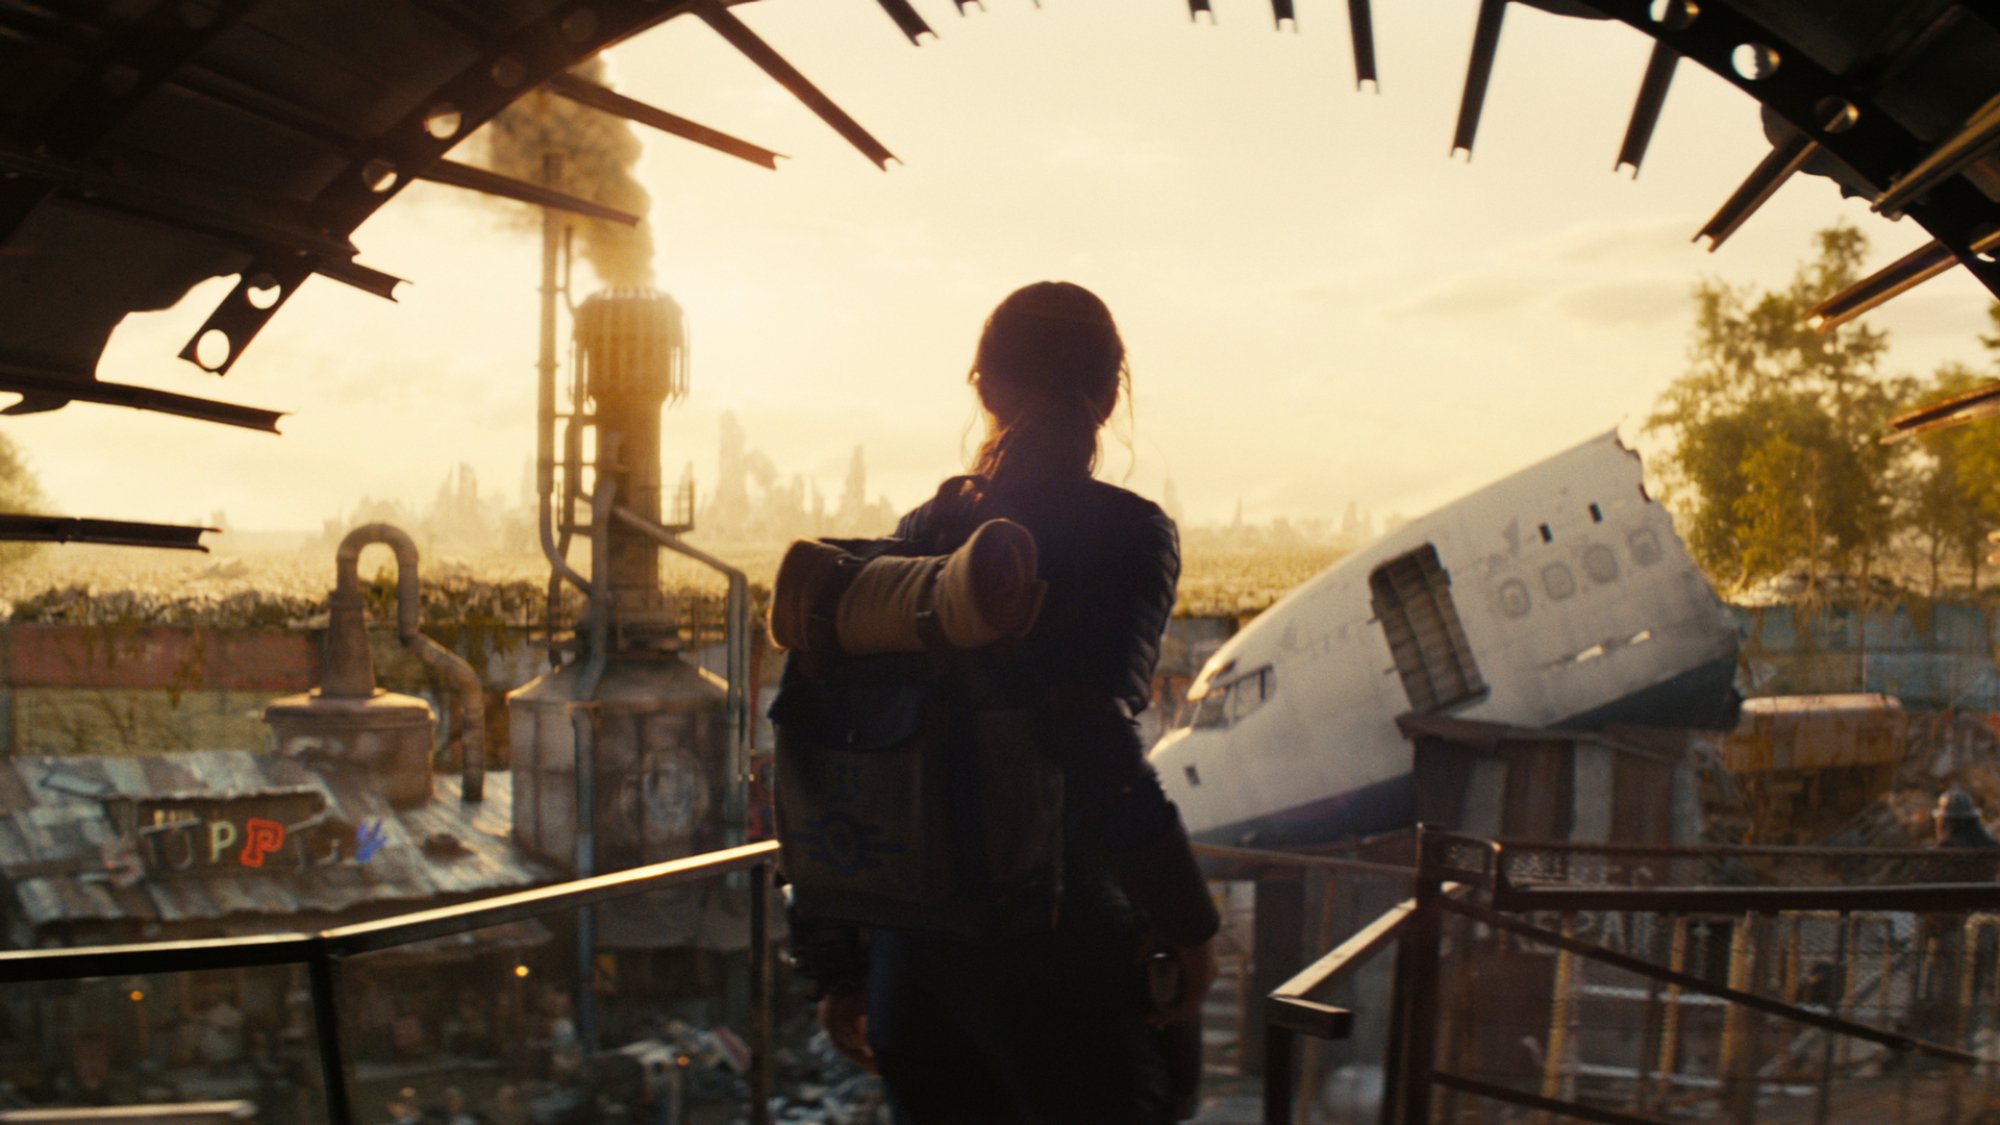 A woman wearing a backpack stands at the edge of a ramshackle town in "Fallout".